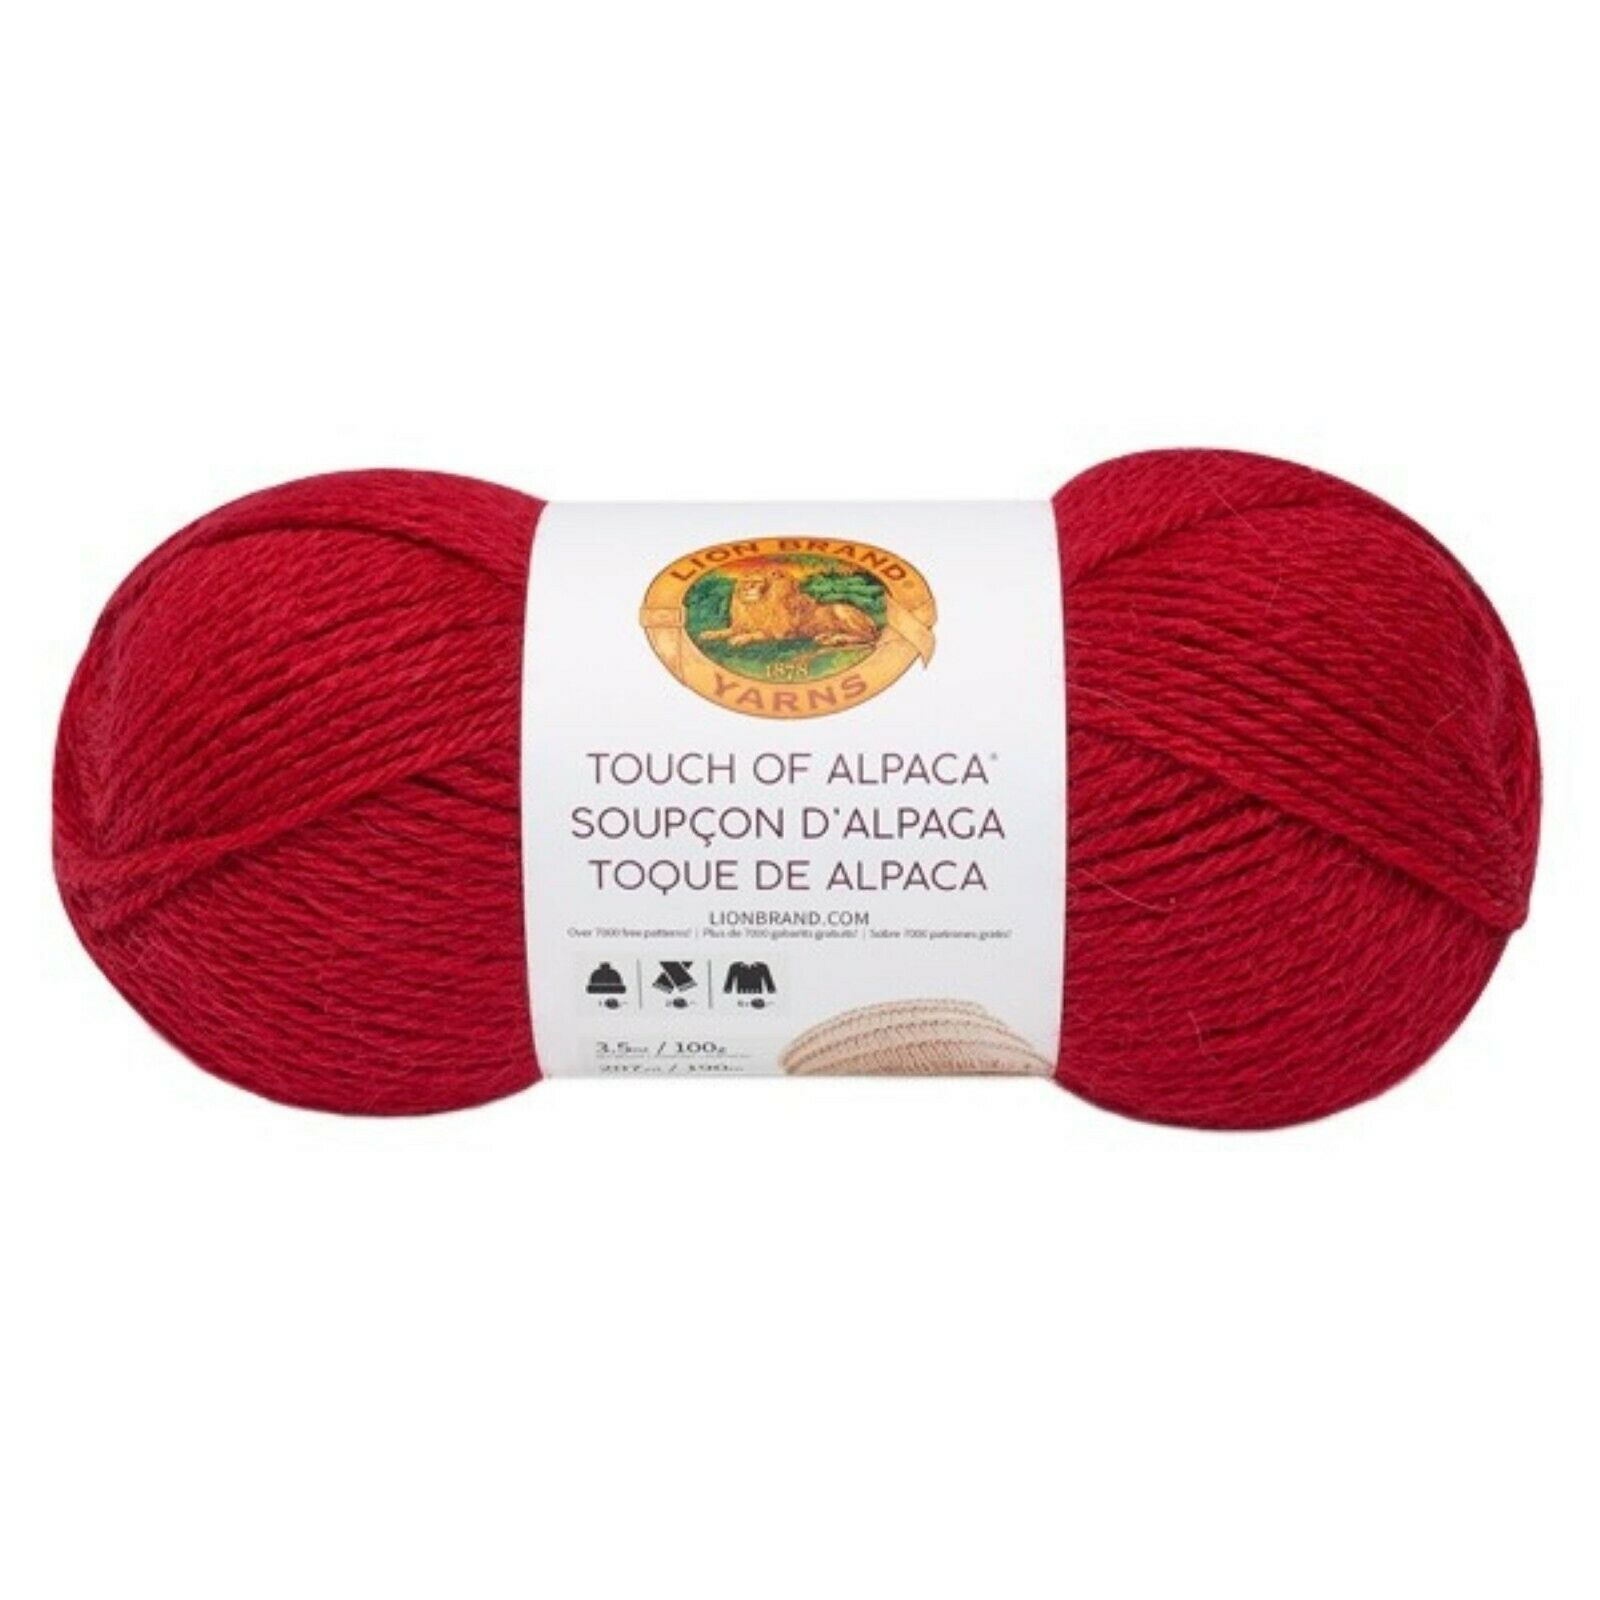 Lion Brand Touch of Alpaca Yarn in Red